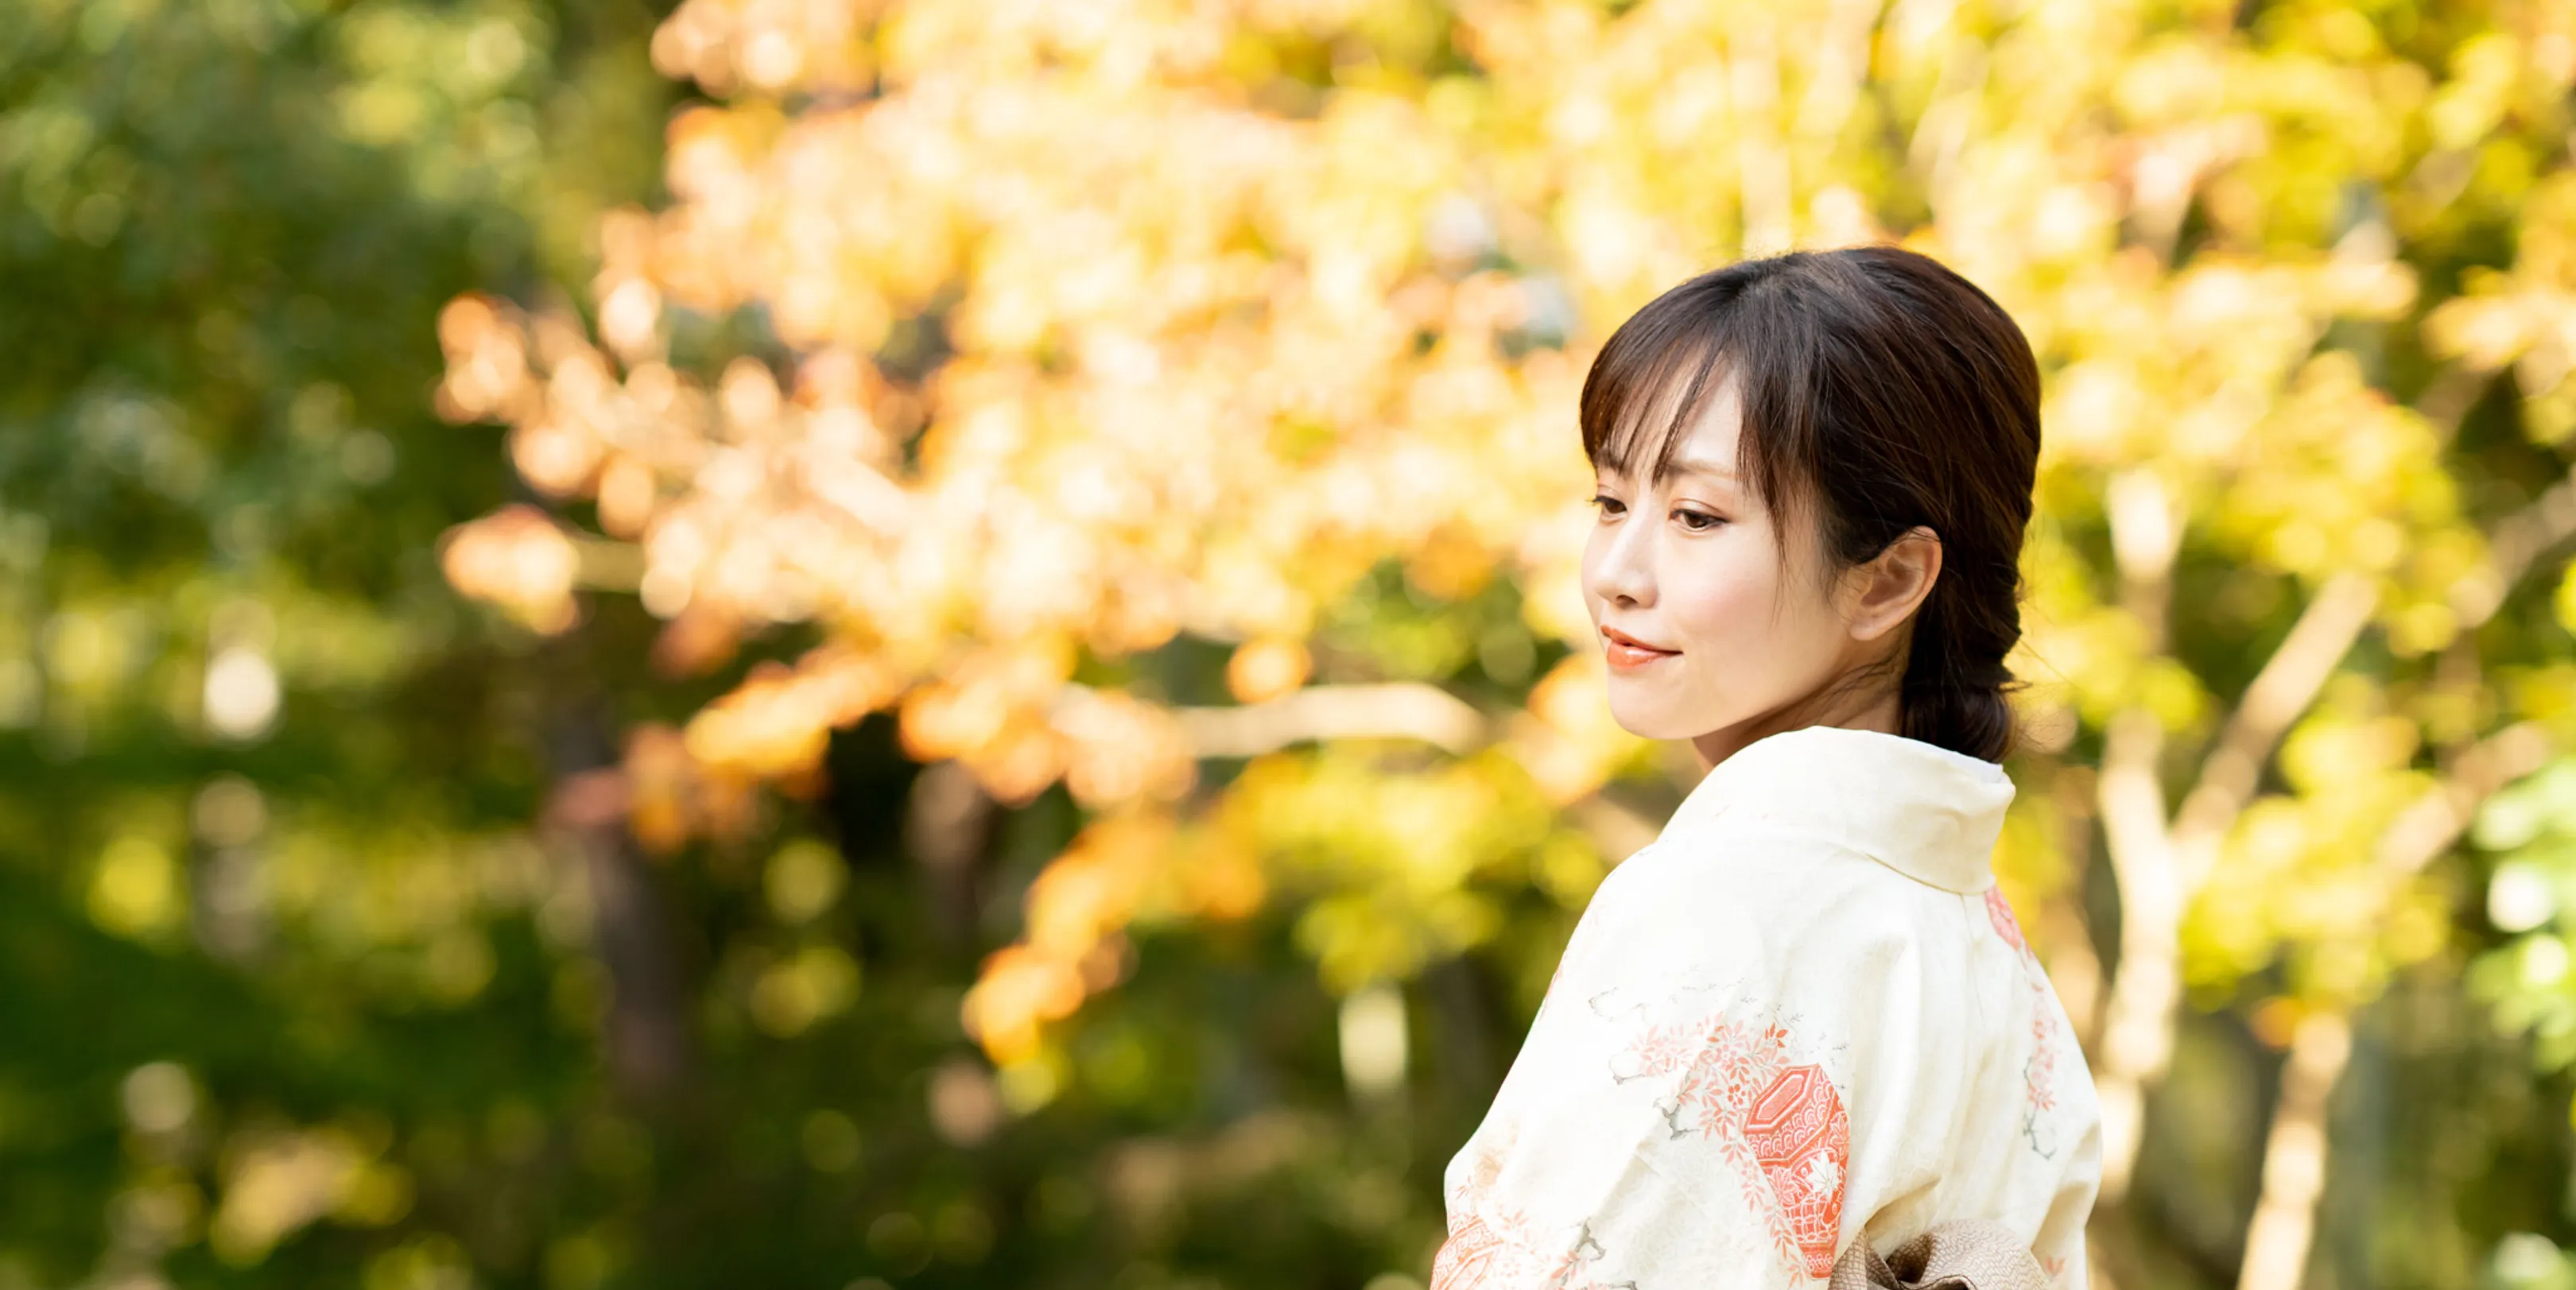 Capture your memories with a photoshoot in Kyoto